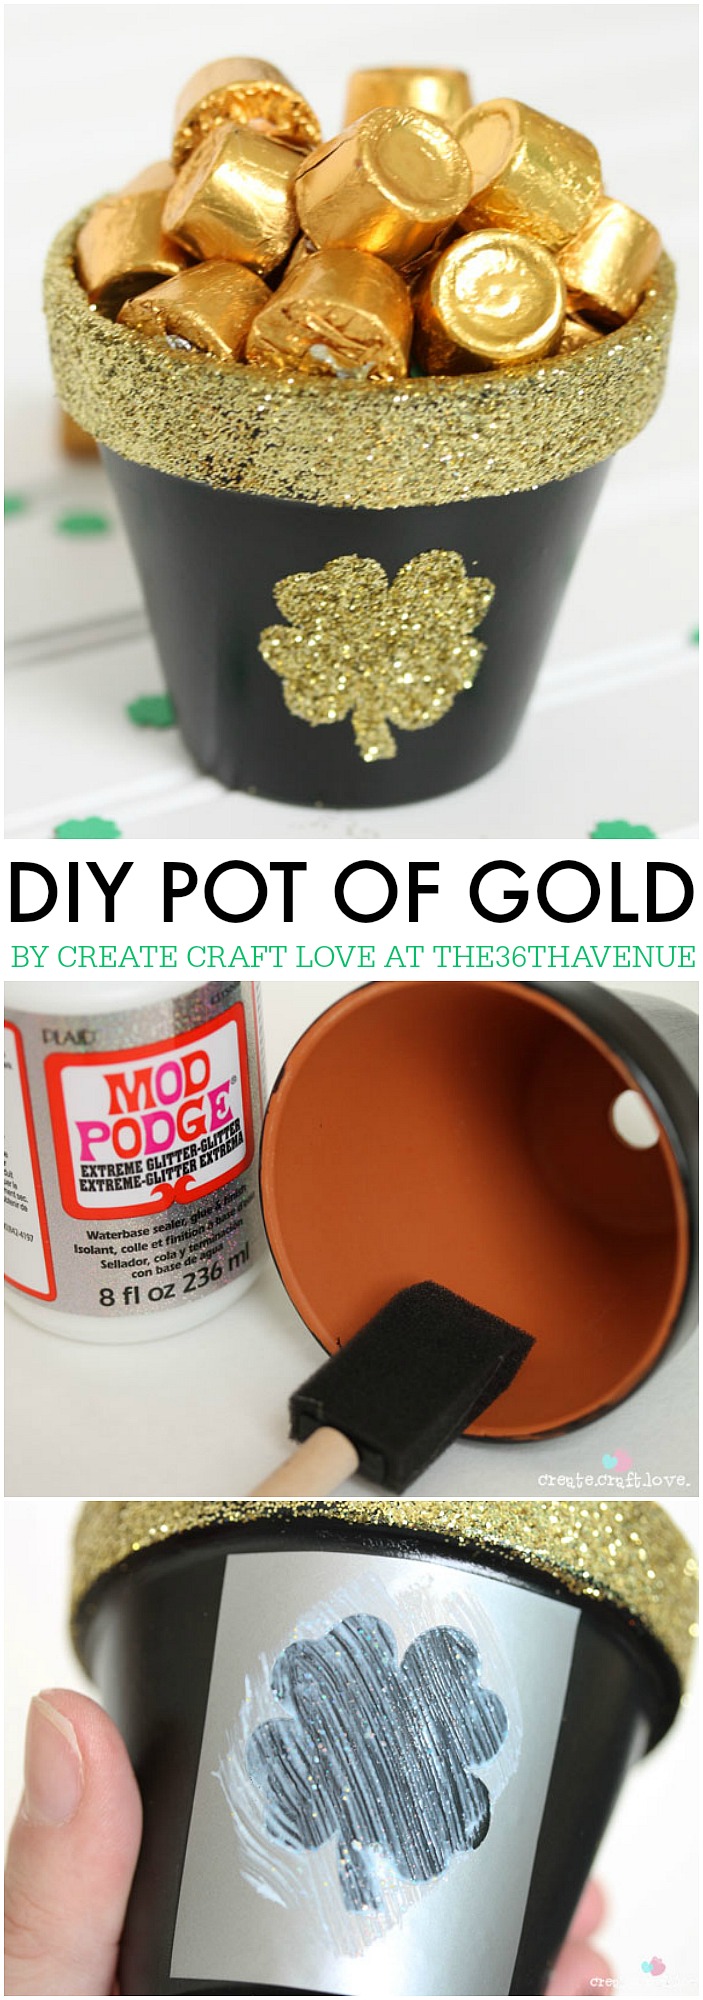 St. Patrick's Day is around the corner. Make this DIY Pot of Gold for your  festivities.